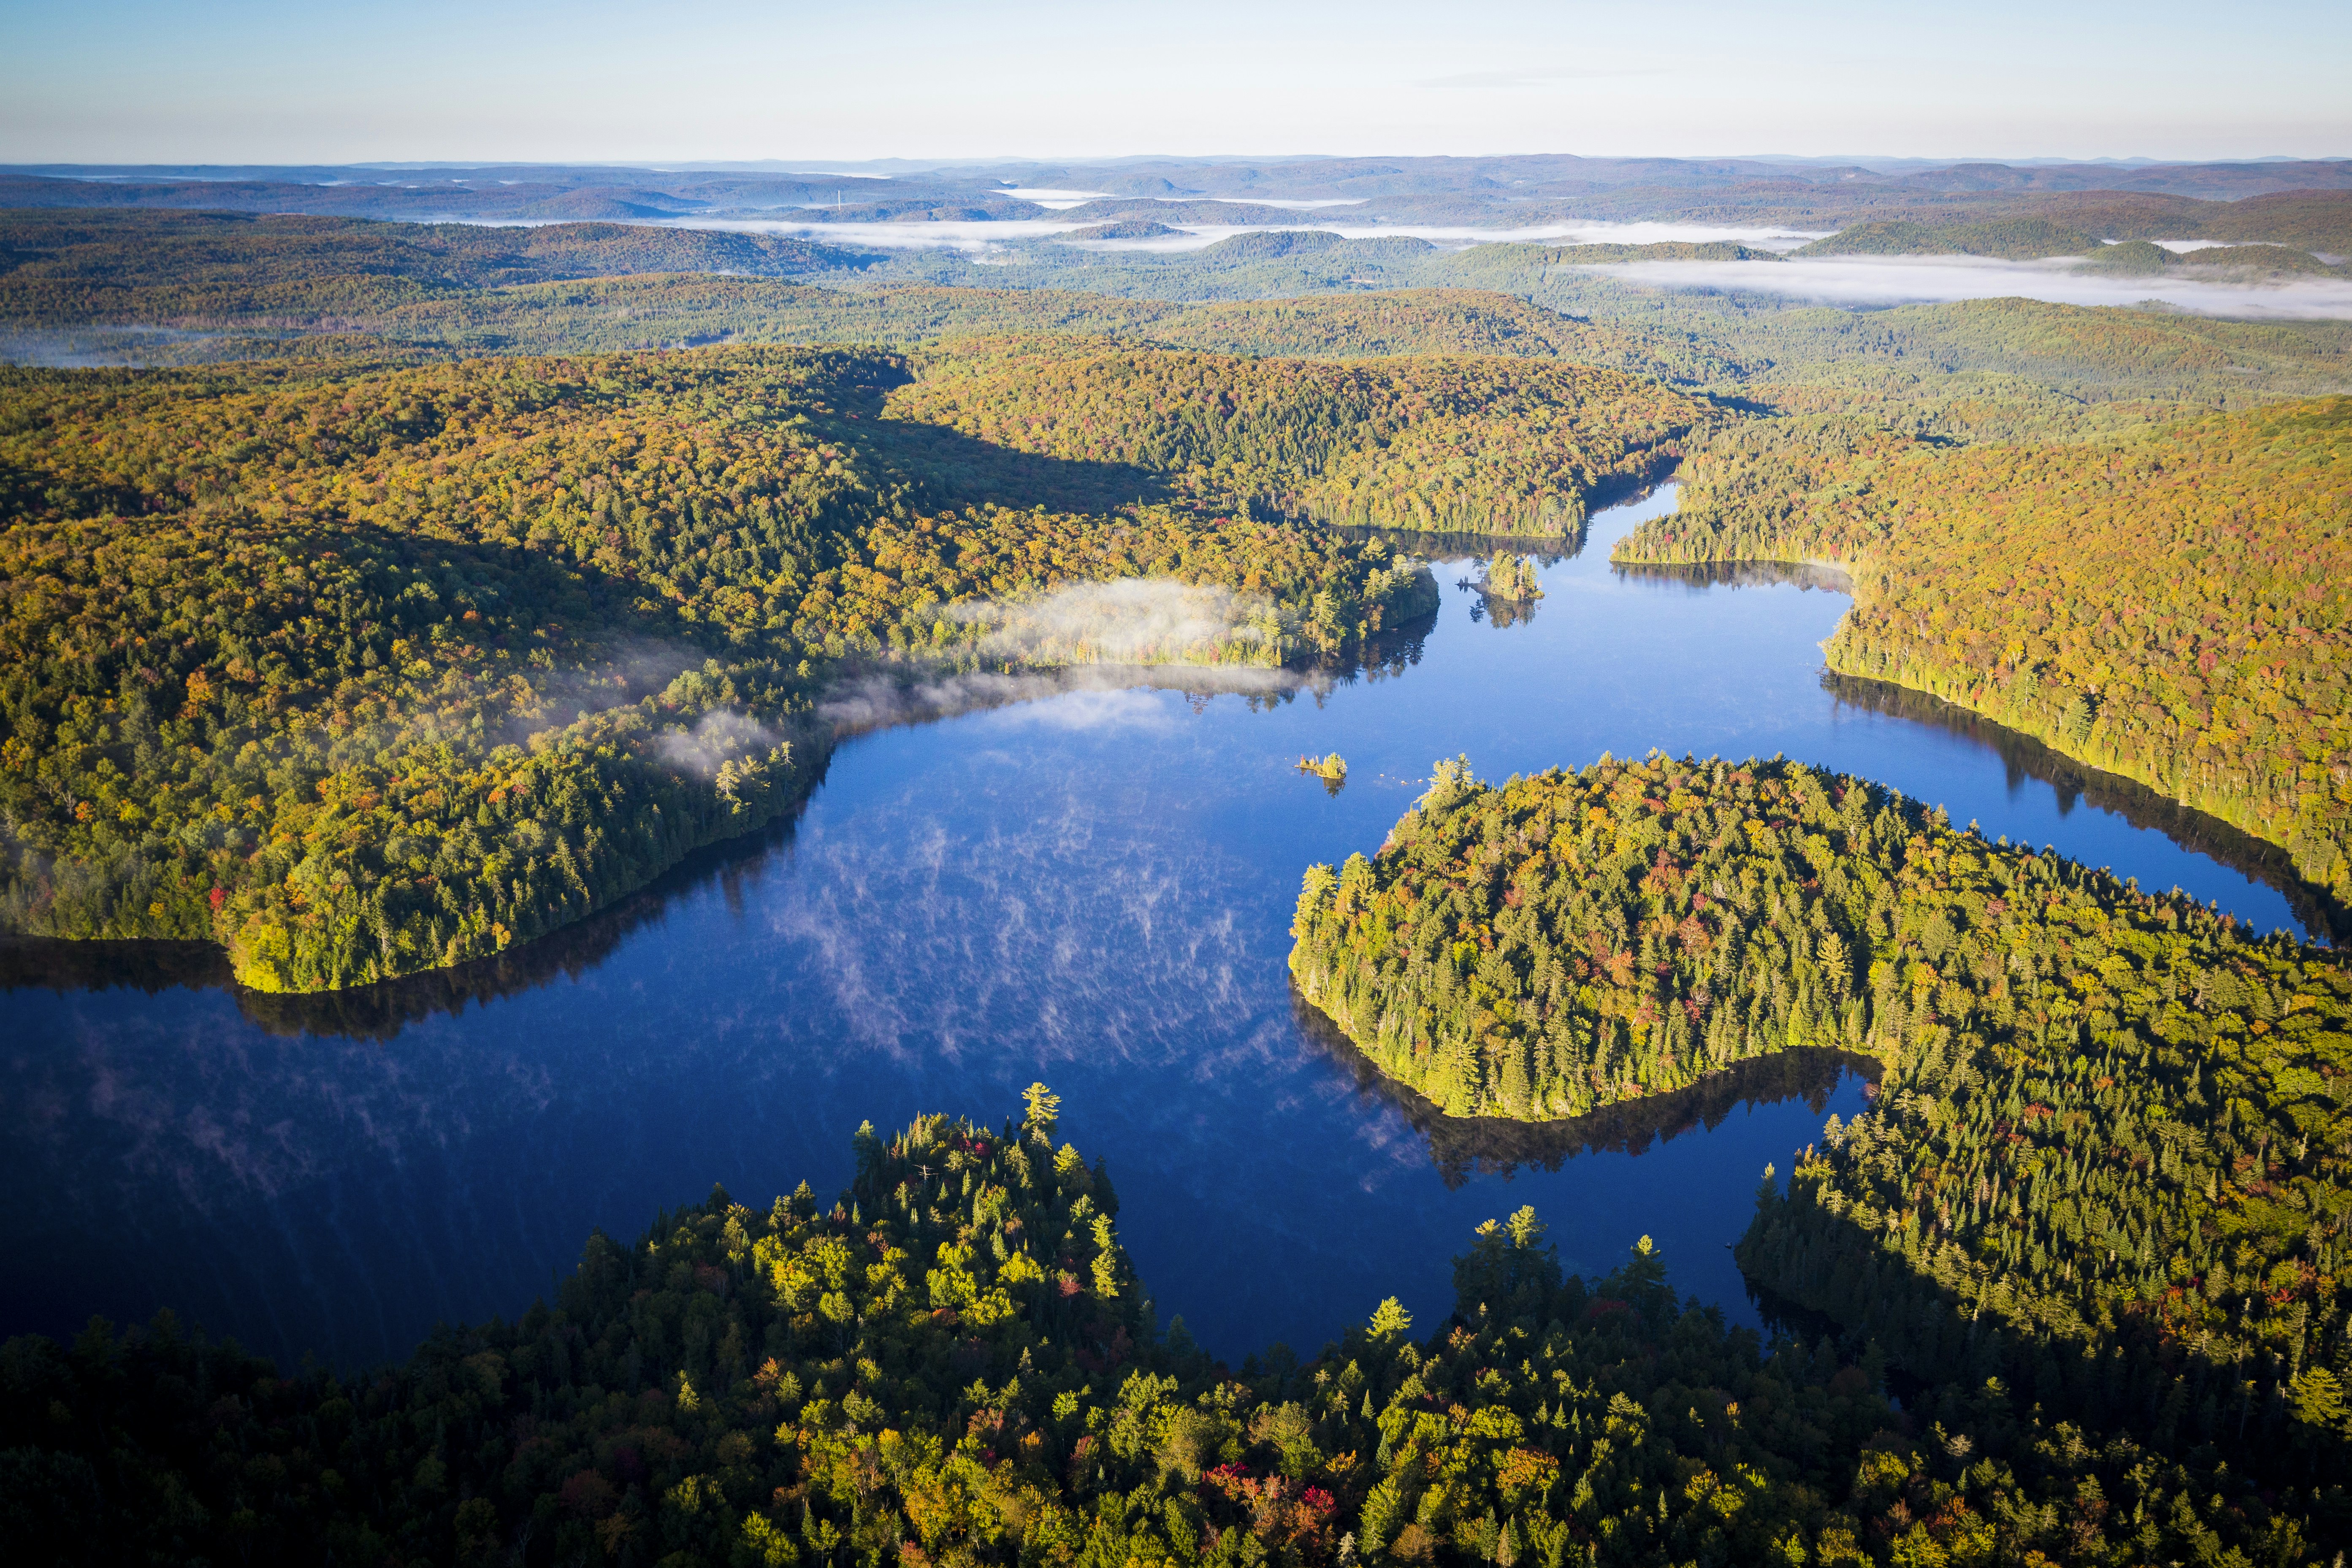 A view over the lakes and hills of La Mauricie National Park in Quebec